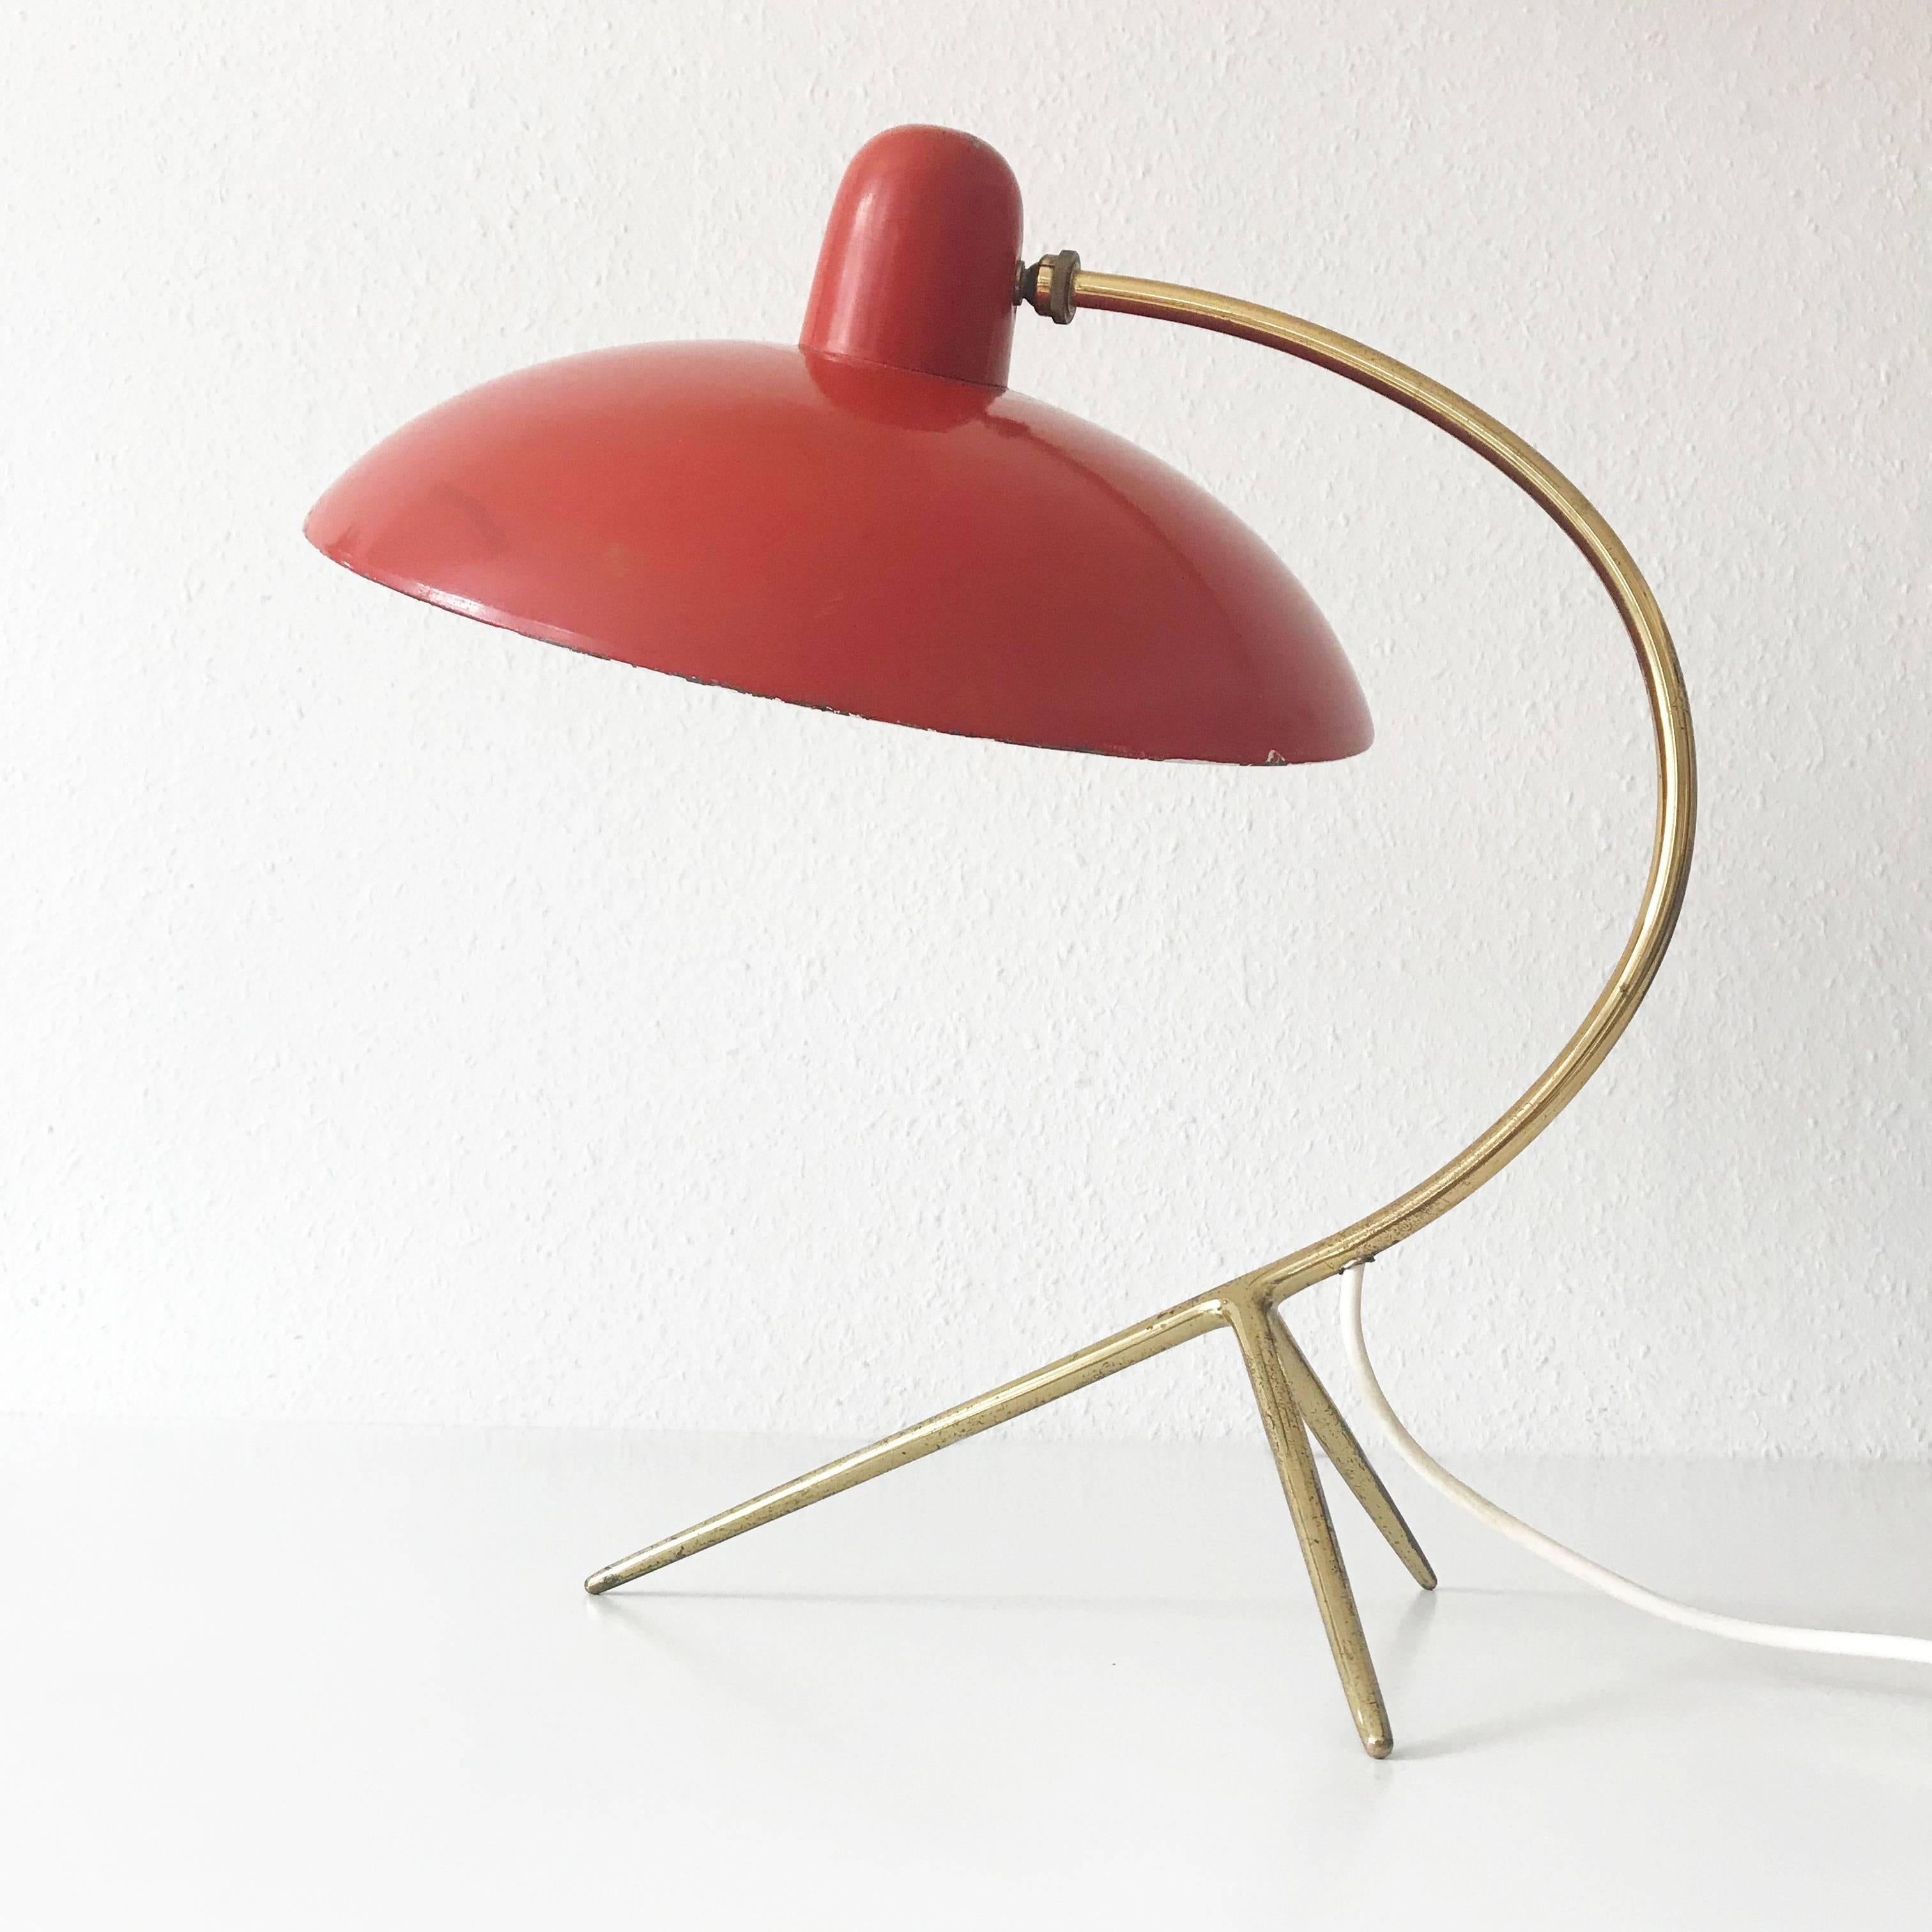 Metal Exceptional Italian Mid-Century Modern Table Lamp, 1950s